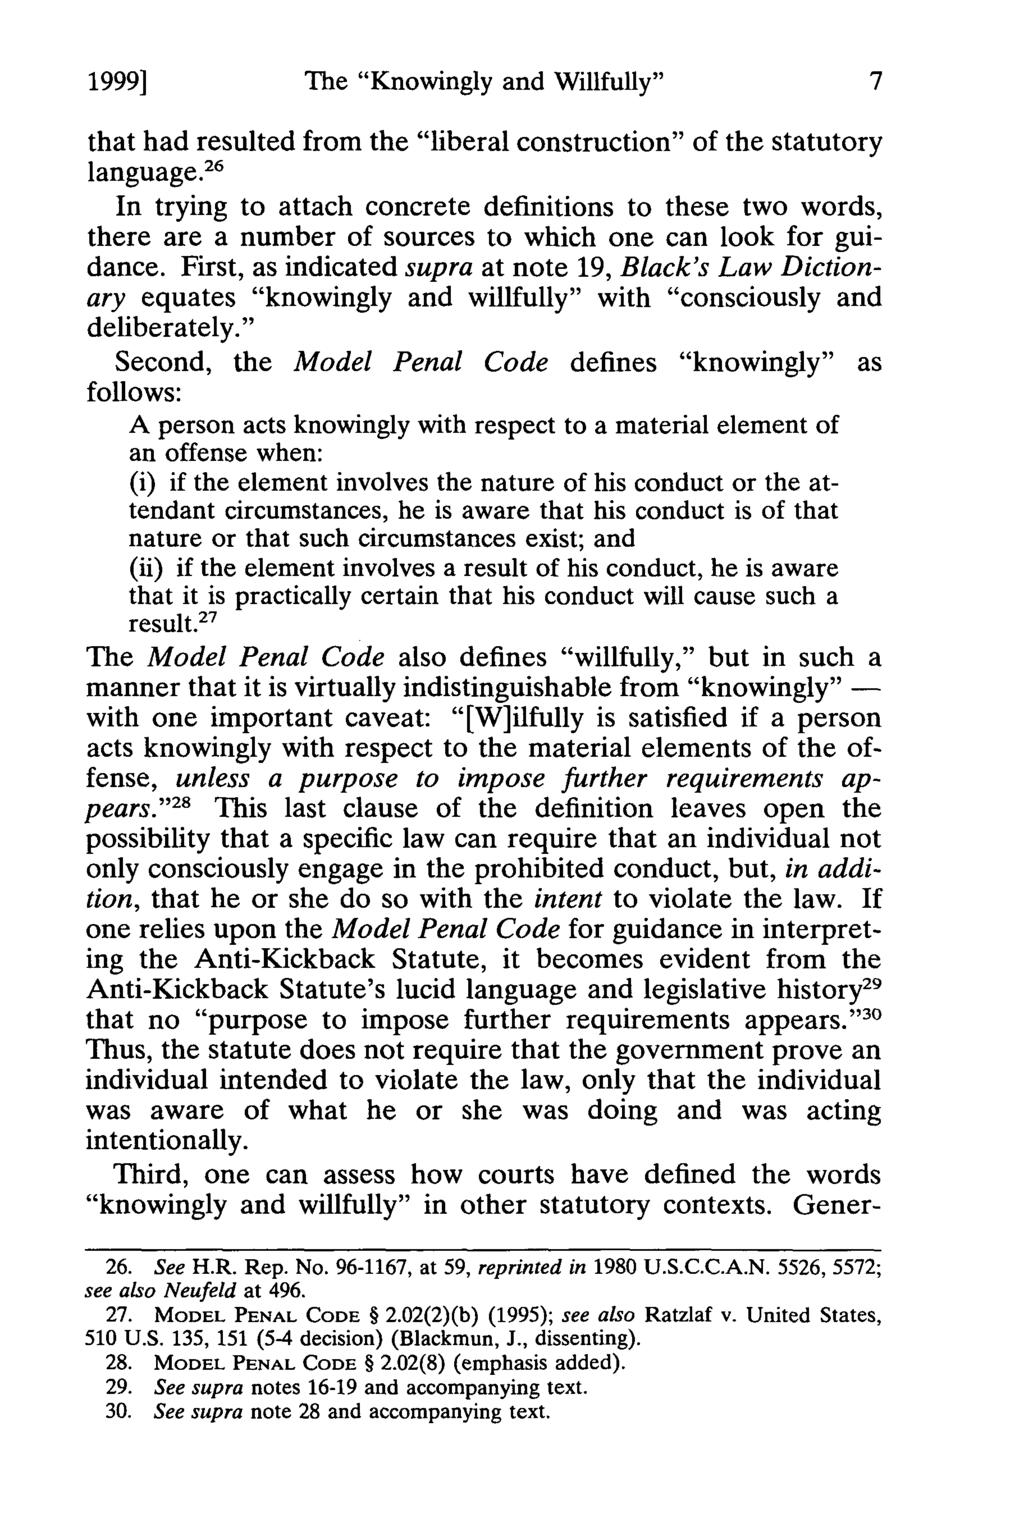 1999] Blair: The "Knowingly and Willfully" Continuum of the Anti-Kickback Stat The "Knowingly and Willfully" that had resulted from the "liberal construction" of the statutory language.